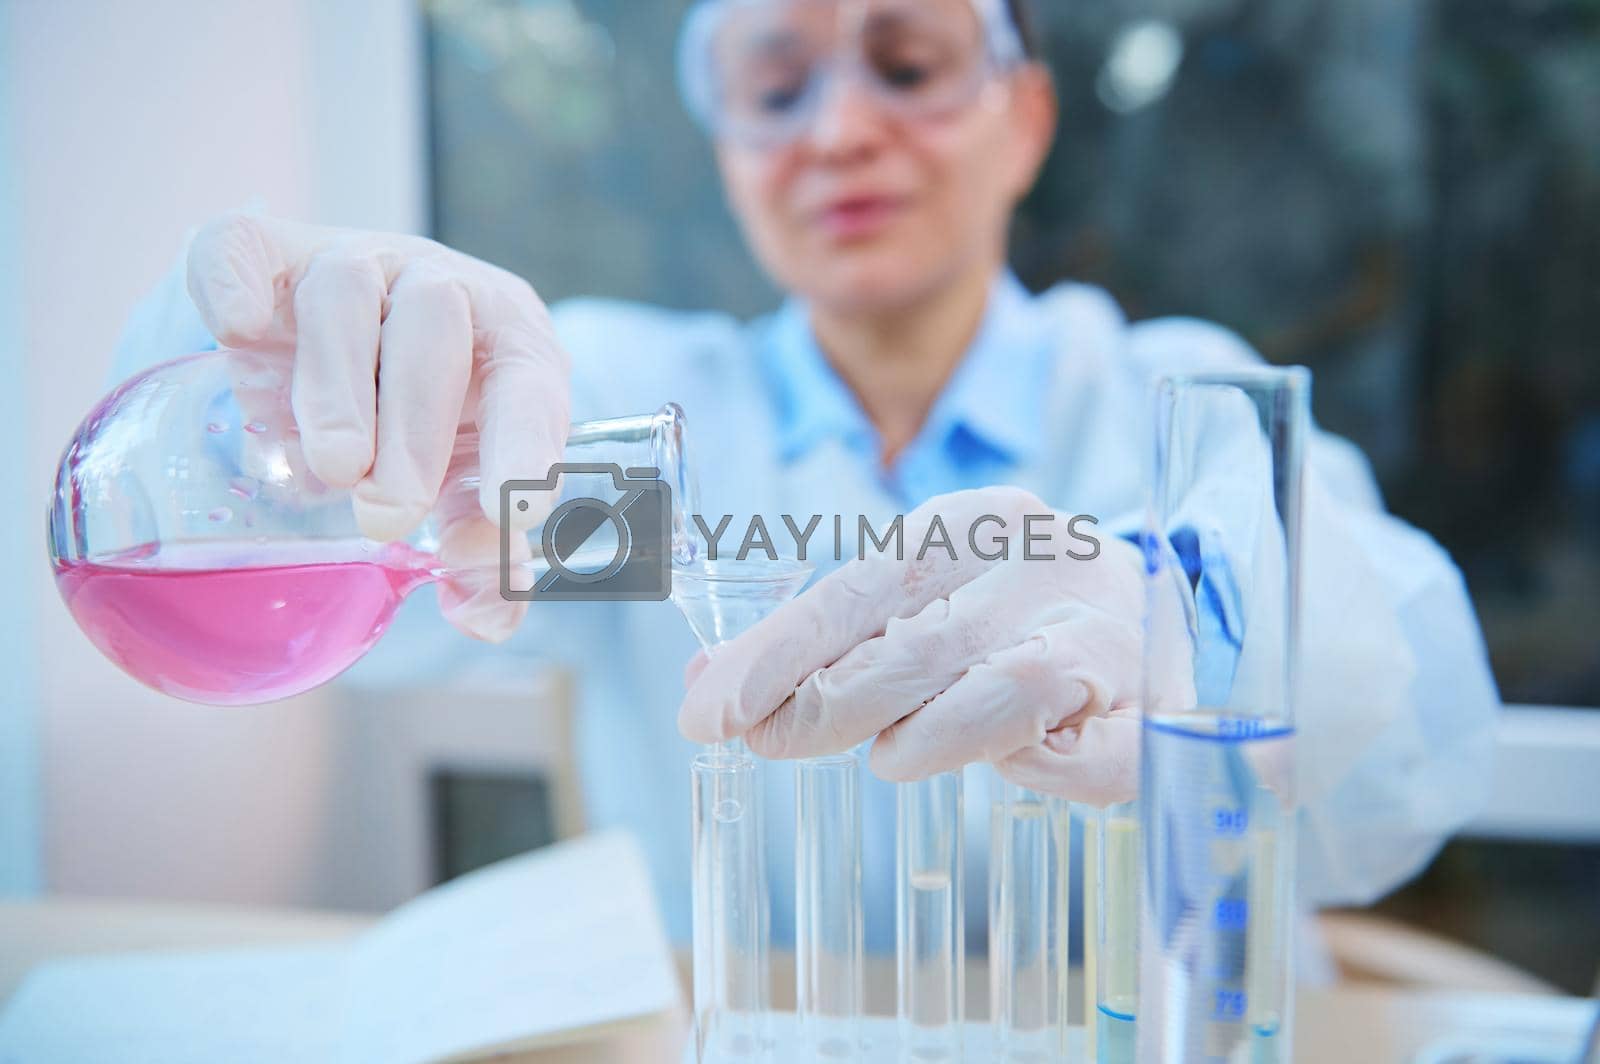 Royalty free image of Close-up. Hands of a scientific researcher pouring liquid through a funnel from a glass laboratory flask into test tubes by artgf